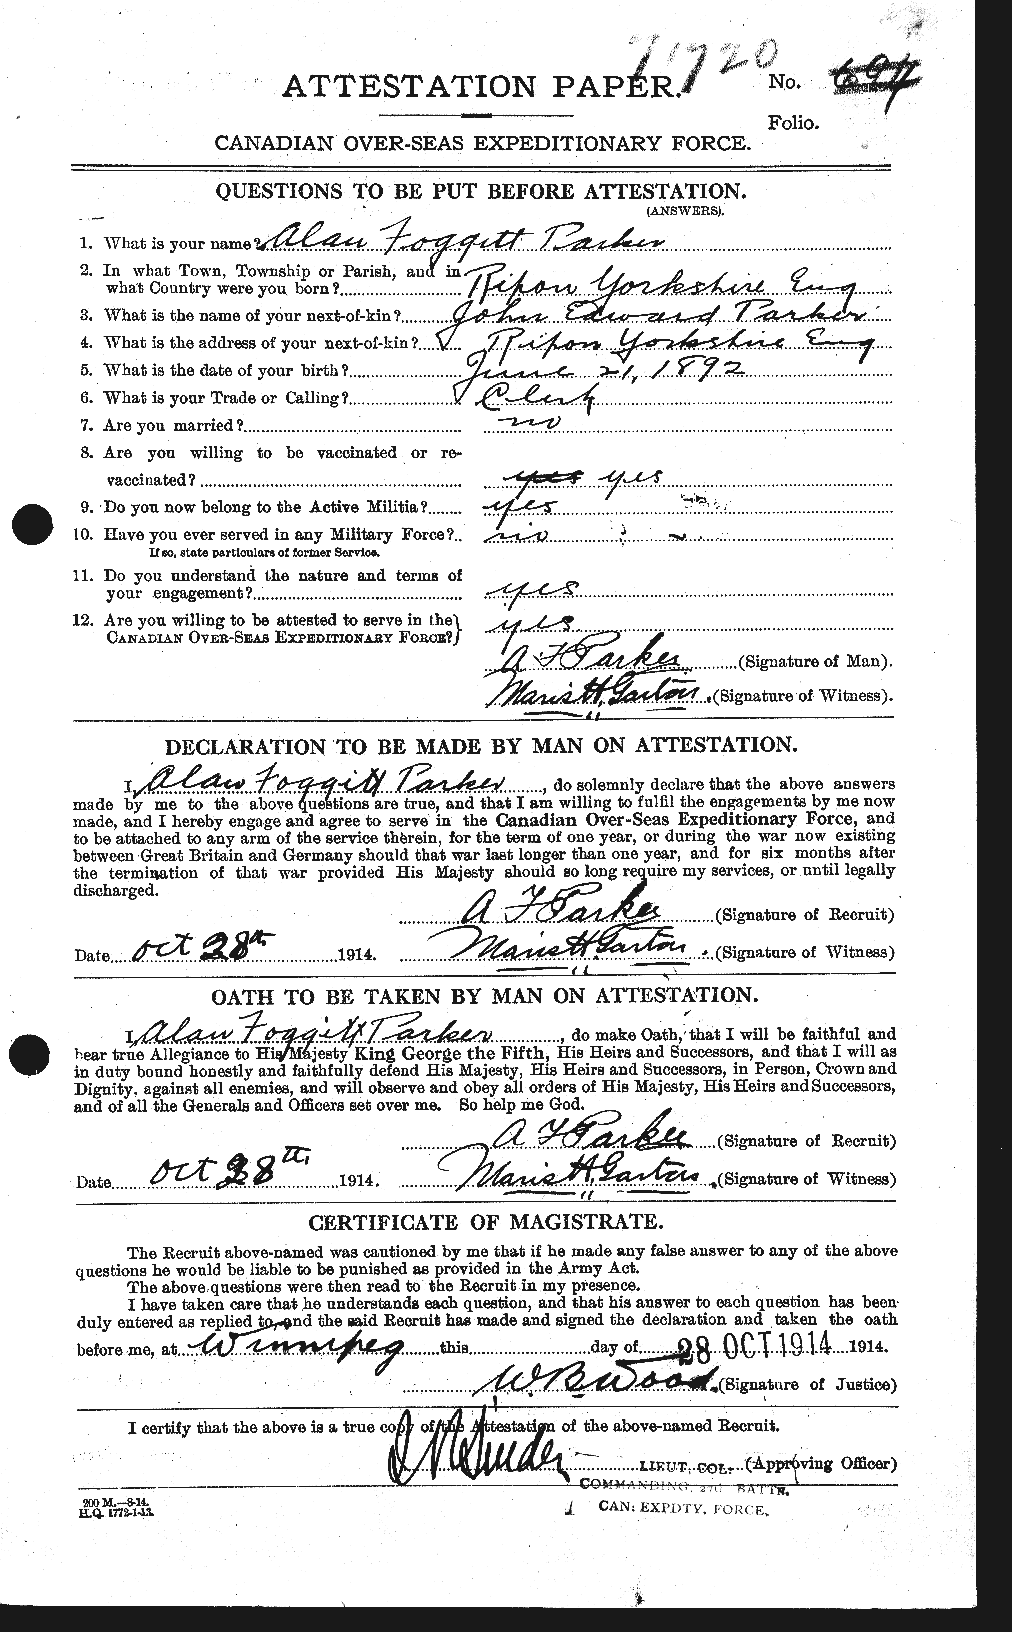 Personnel Records of the First World War - CEF 564956a